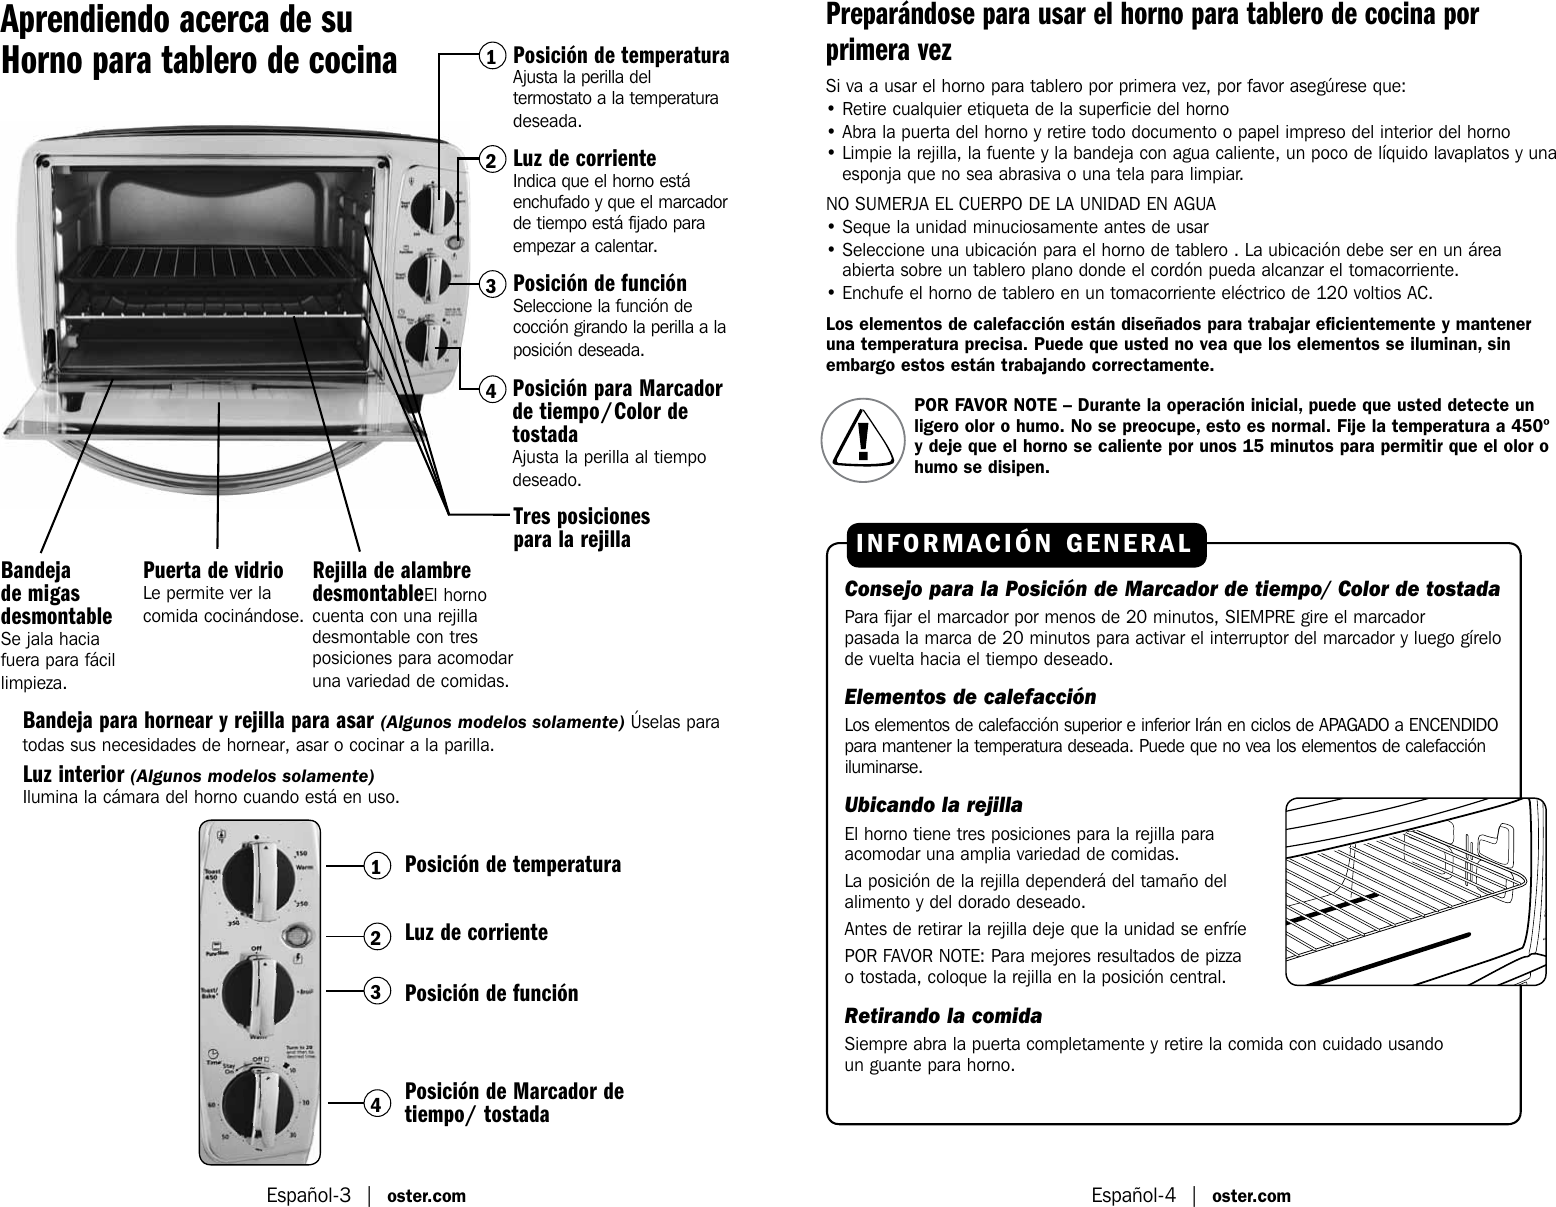 Page 8 of 11 - Oster Oster-Tssttv0000-Oster-Stainless-Steel-6-Slice-Toaster-Oven-Instruction-Manual-  Oster-tssttv0000-oster-stainless-steel-6-slice-toaster-oven-instruction-manual